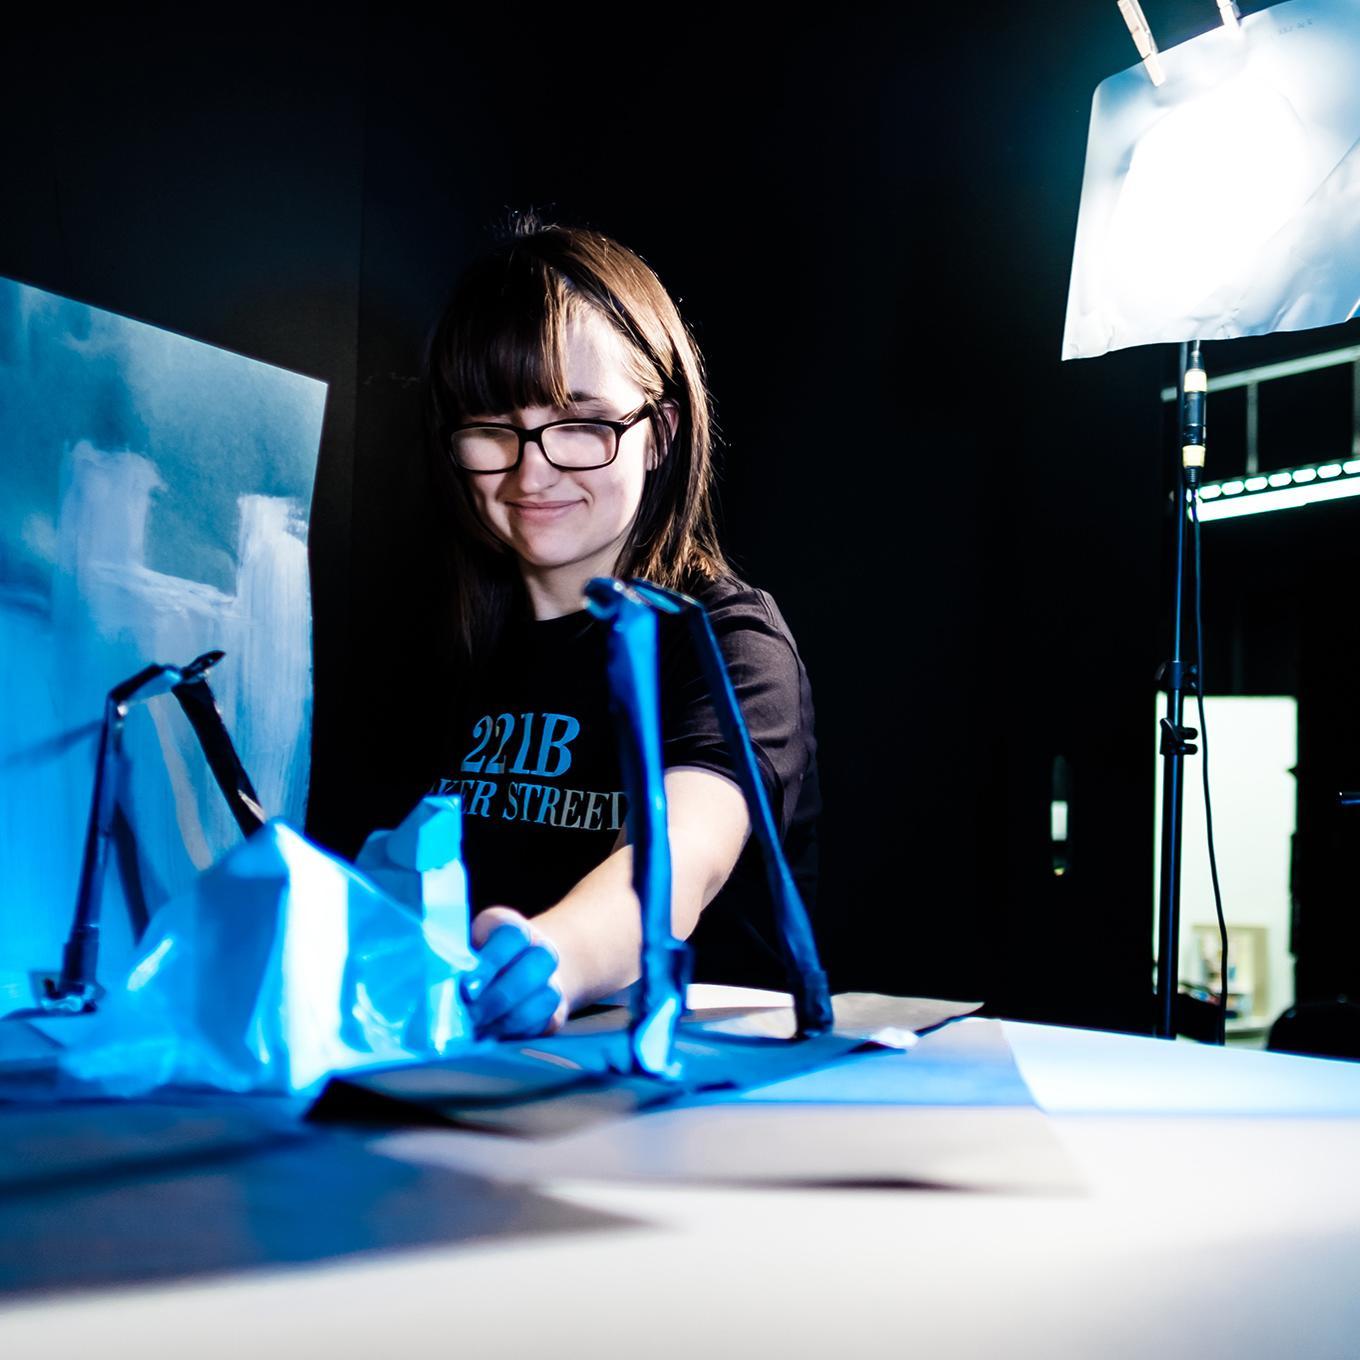 A student arranges props and models for a stop-motion animation shoot